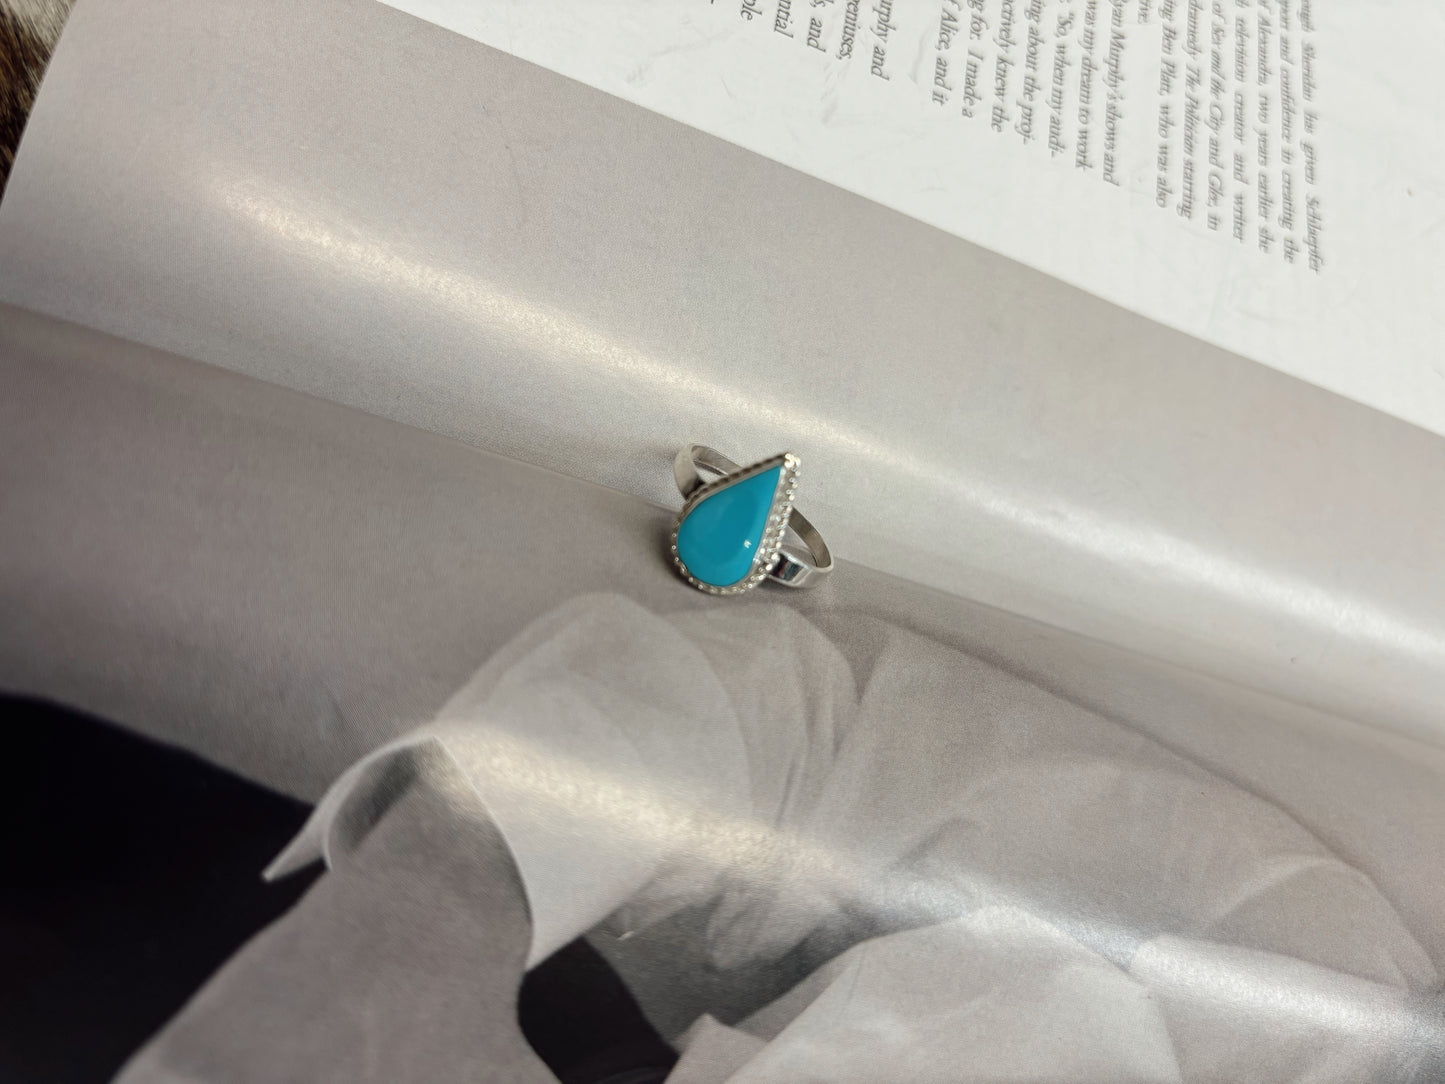 The Cowboy's Teardrop Turquoise Ring - size 7.5